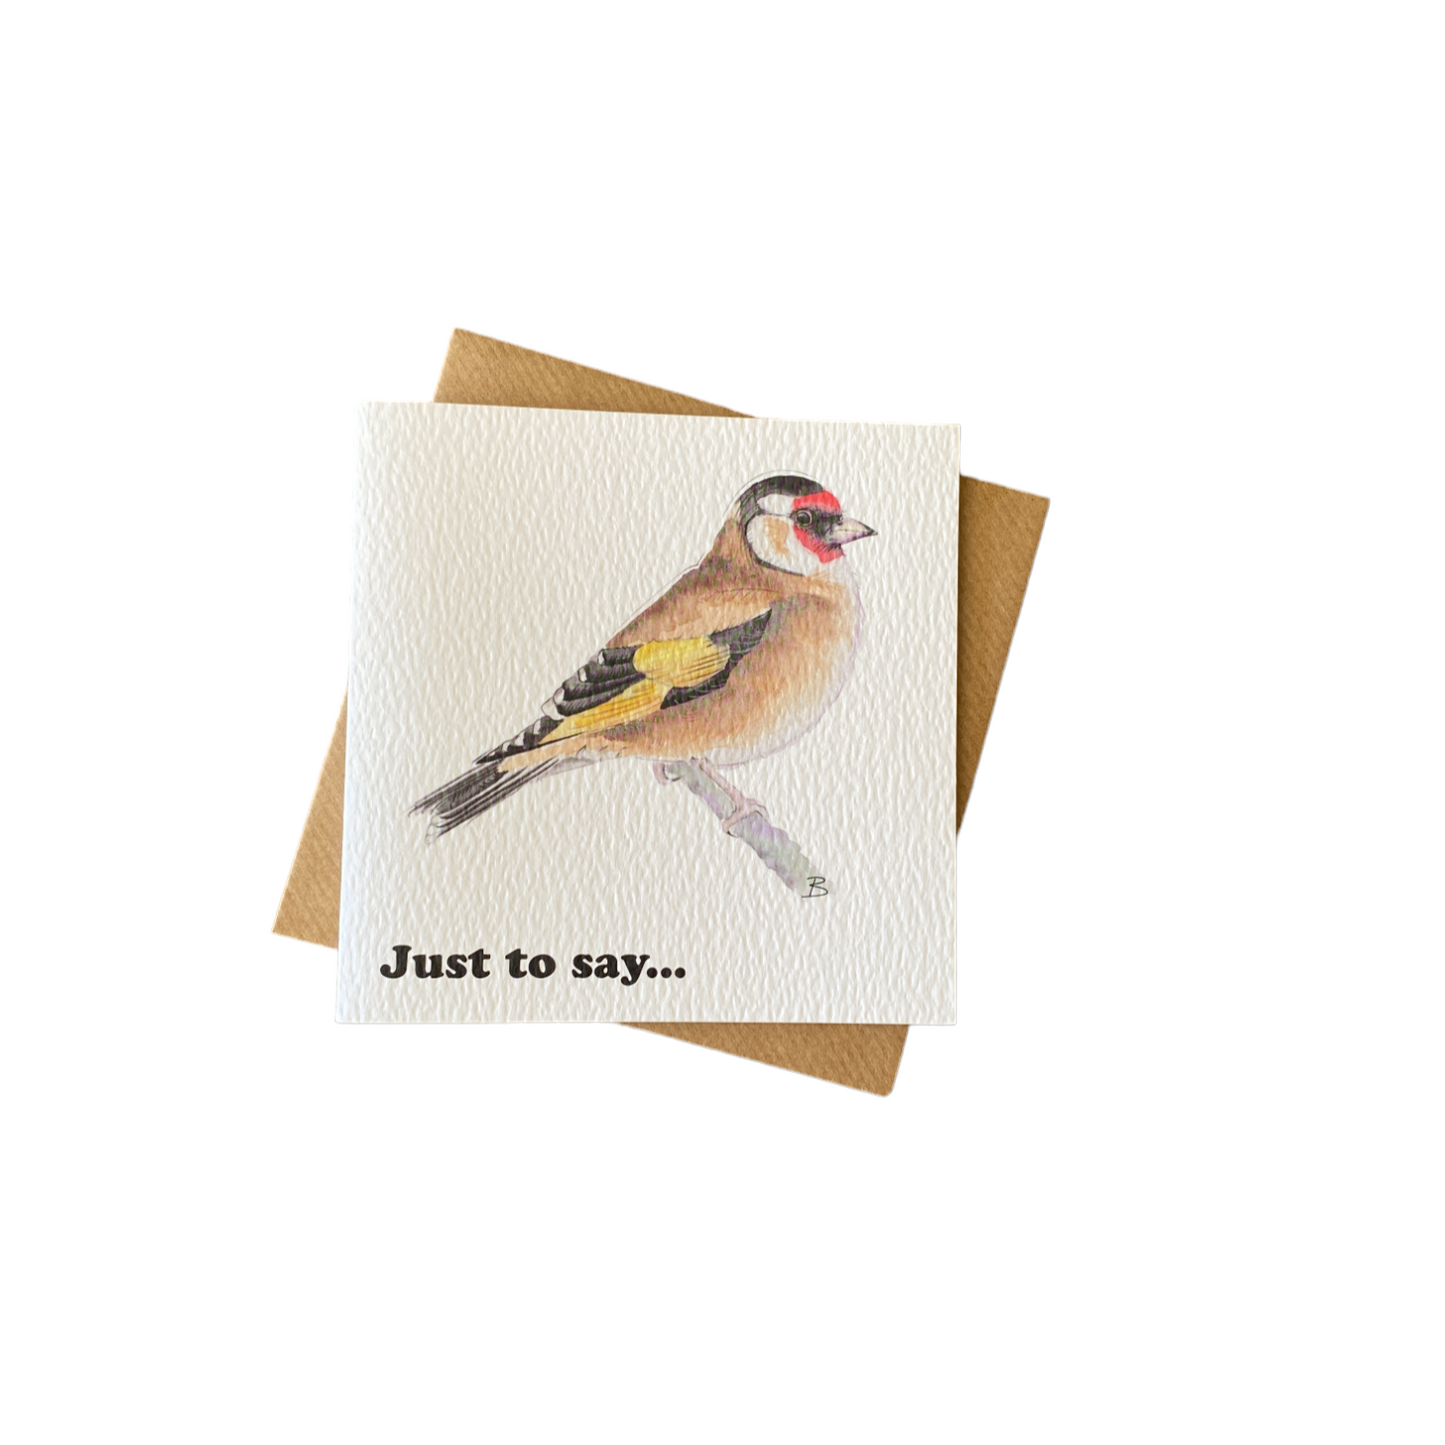 'Sweet Gold' Goldfinch "Just to say" Notecard